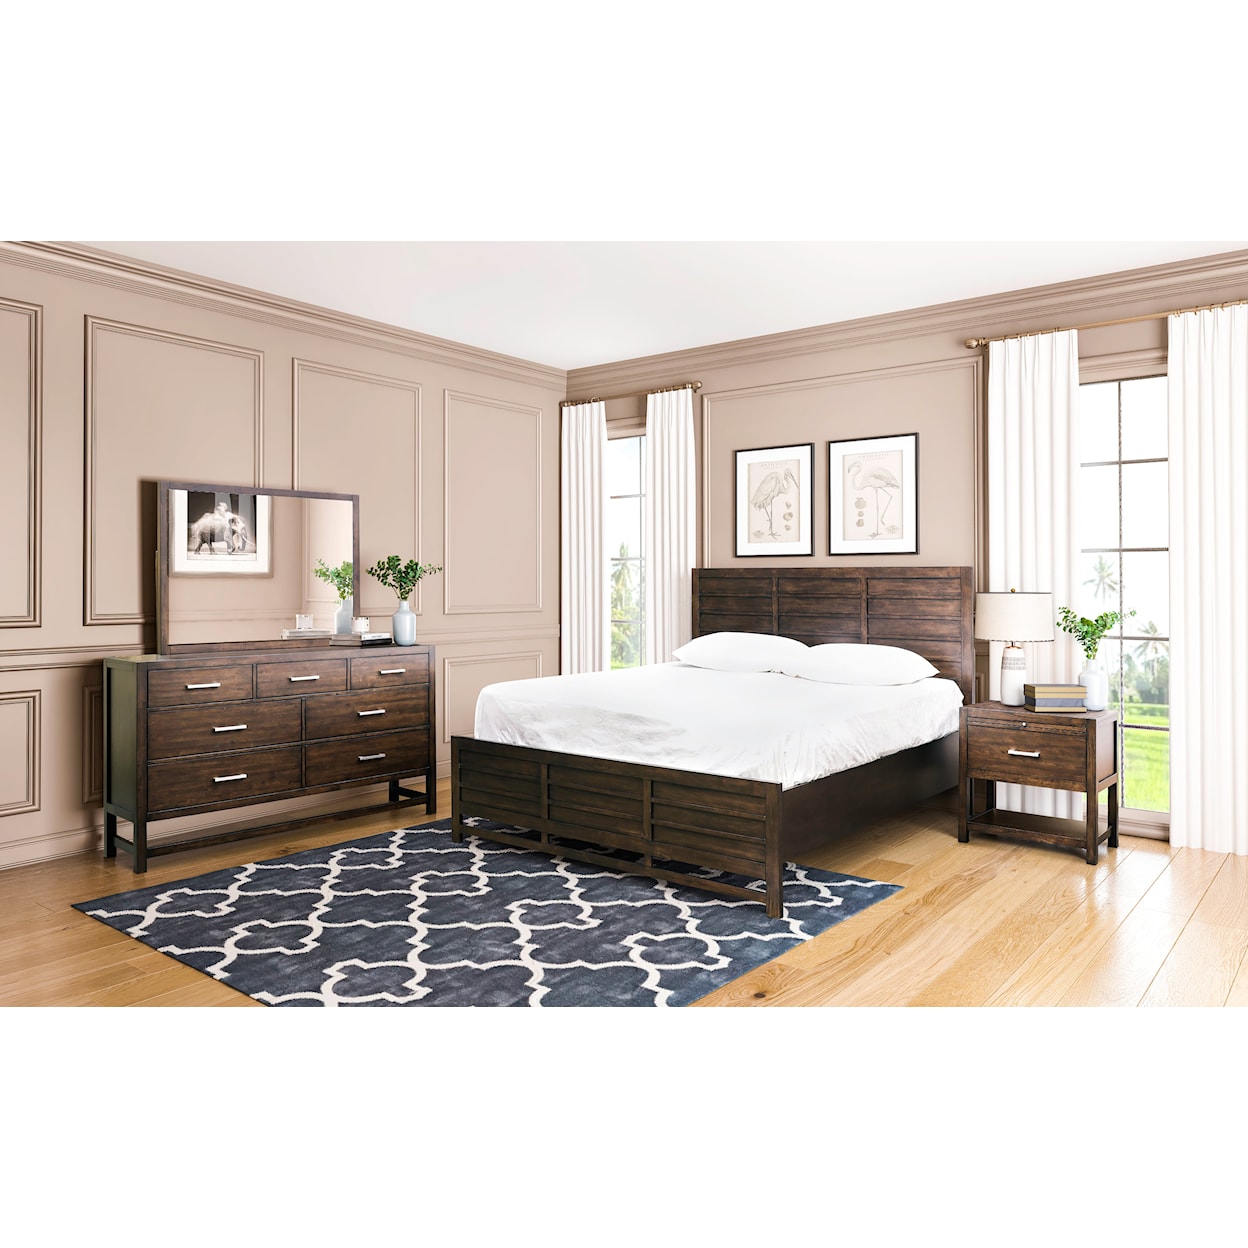 A-A Kendall 4 Piece King Bedroom Set